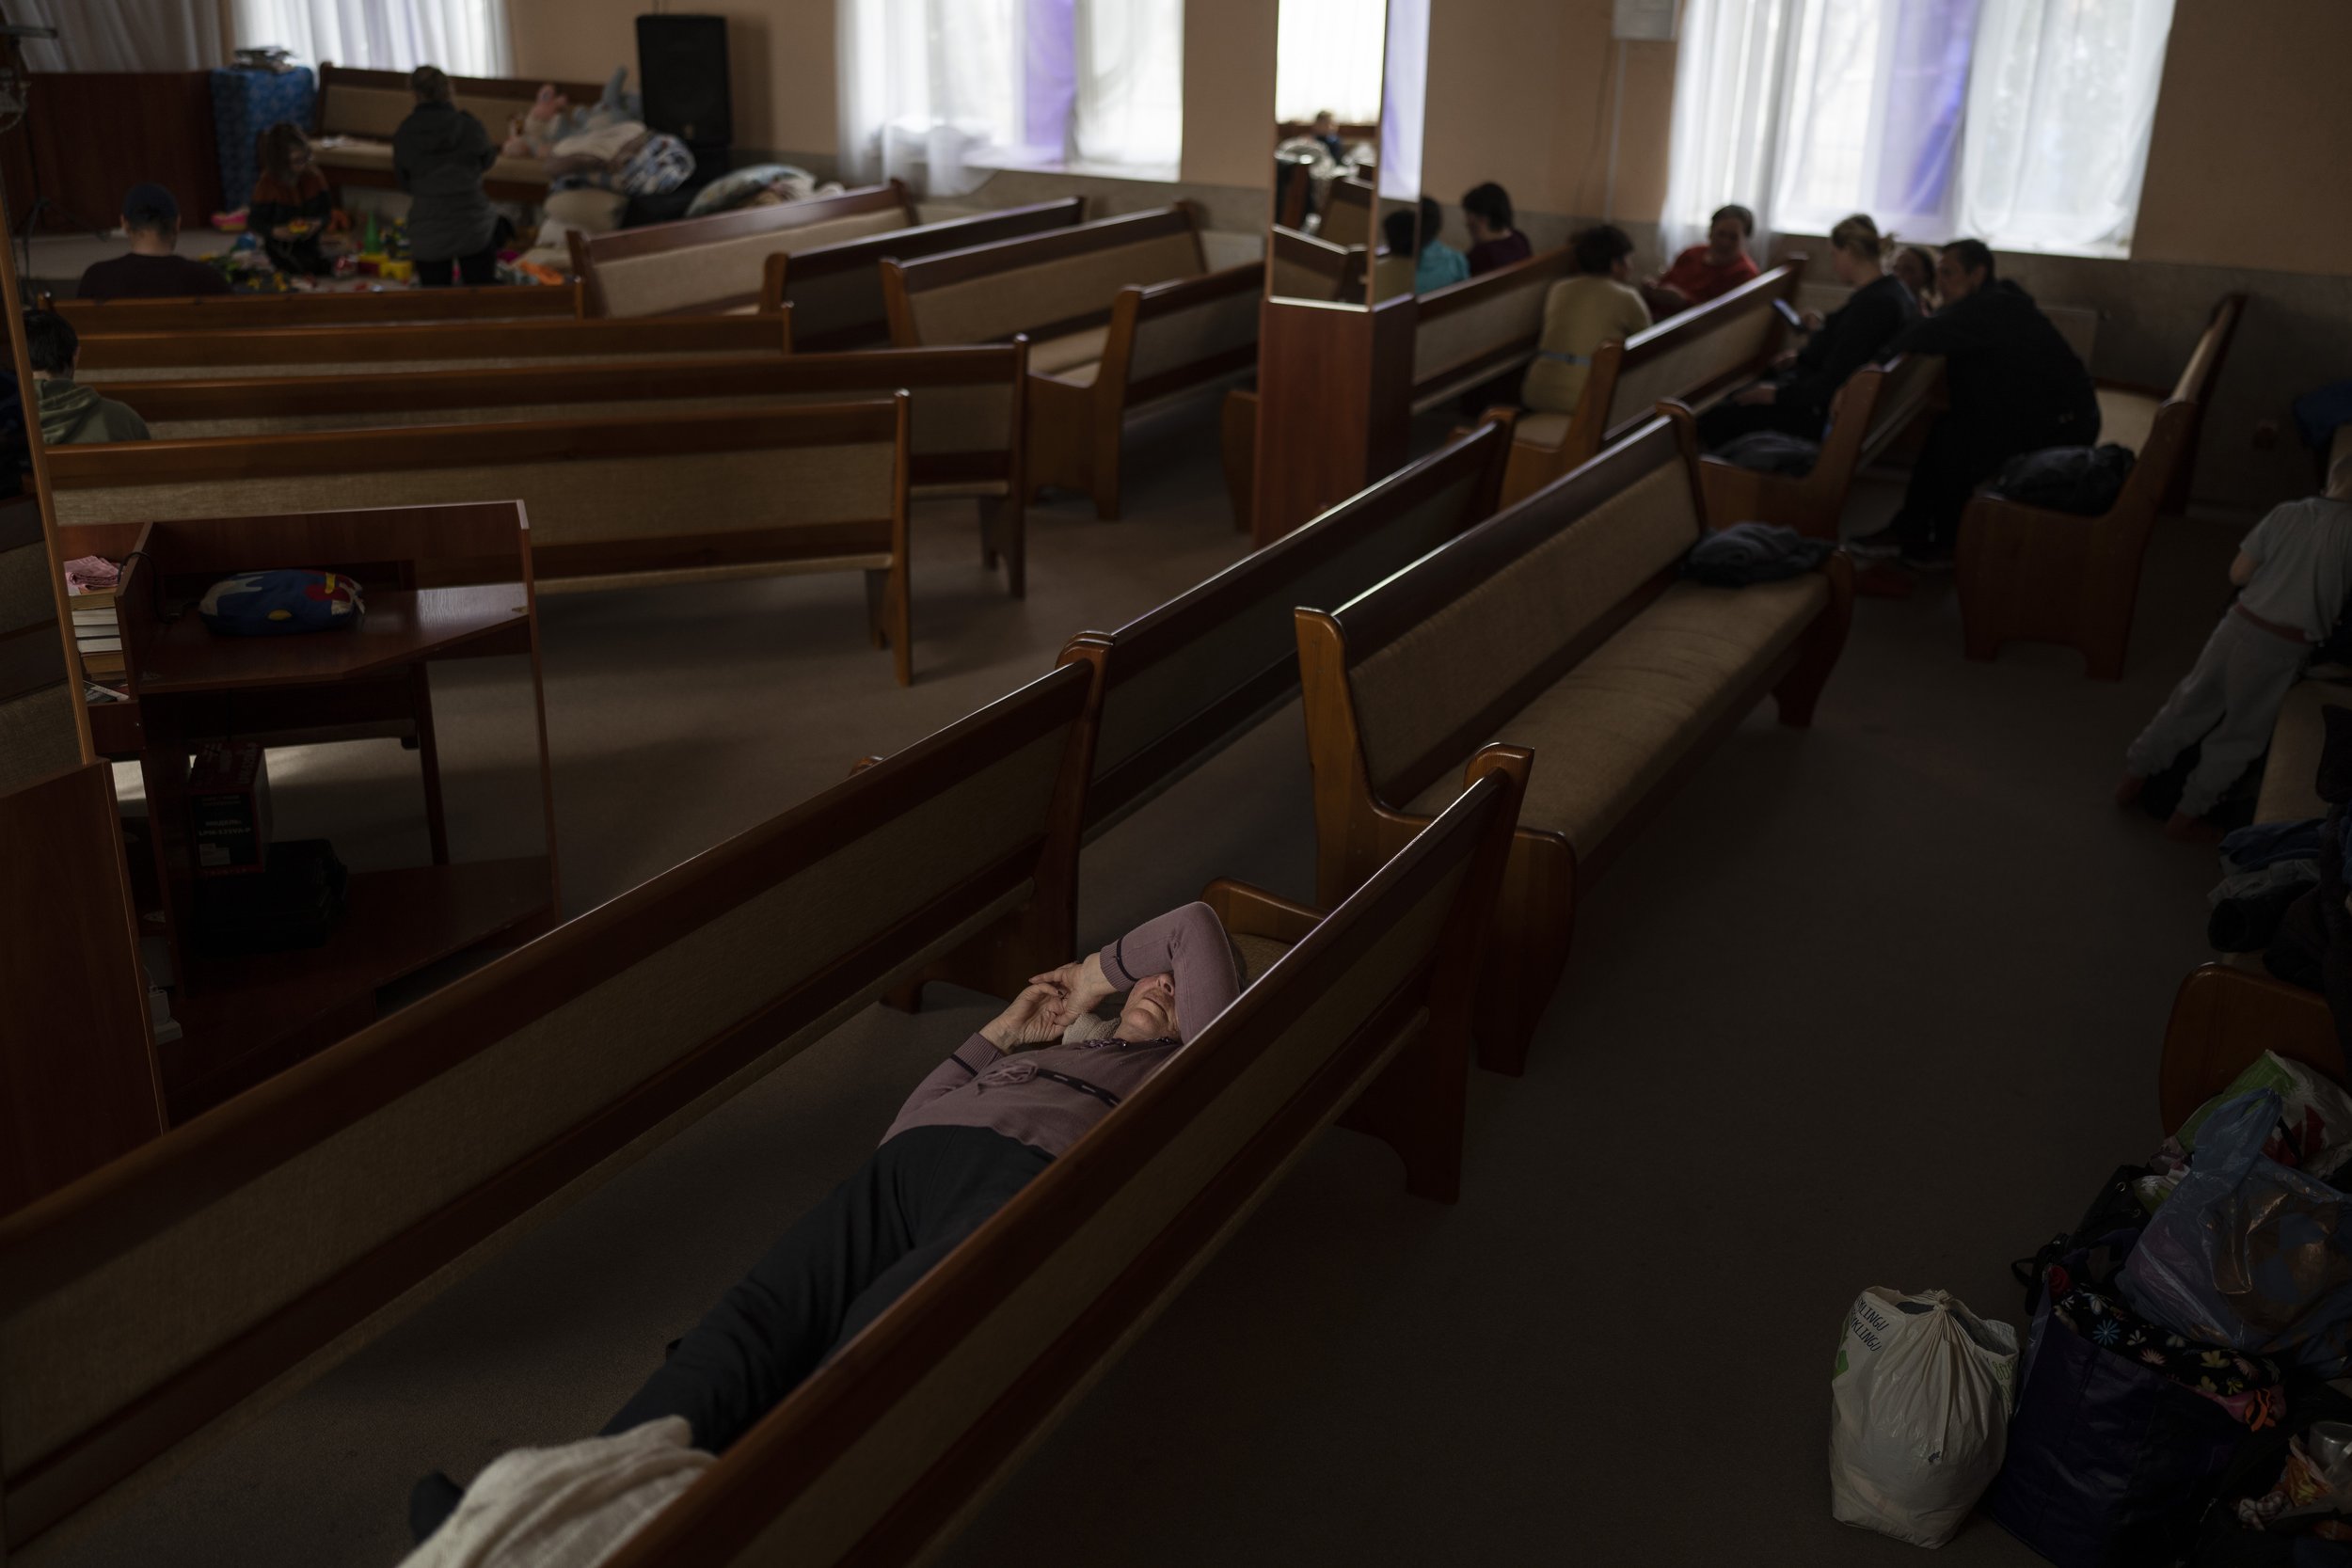  People take shelter inside a church after fleeing from nearby villages that have been attacked by the Russian army, in the town of Bashtanka, Mykolaiv district, Ukraine, on Thursday, March 31, 2022. (AP Photo/Petros Giannakouris) 